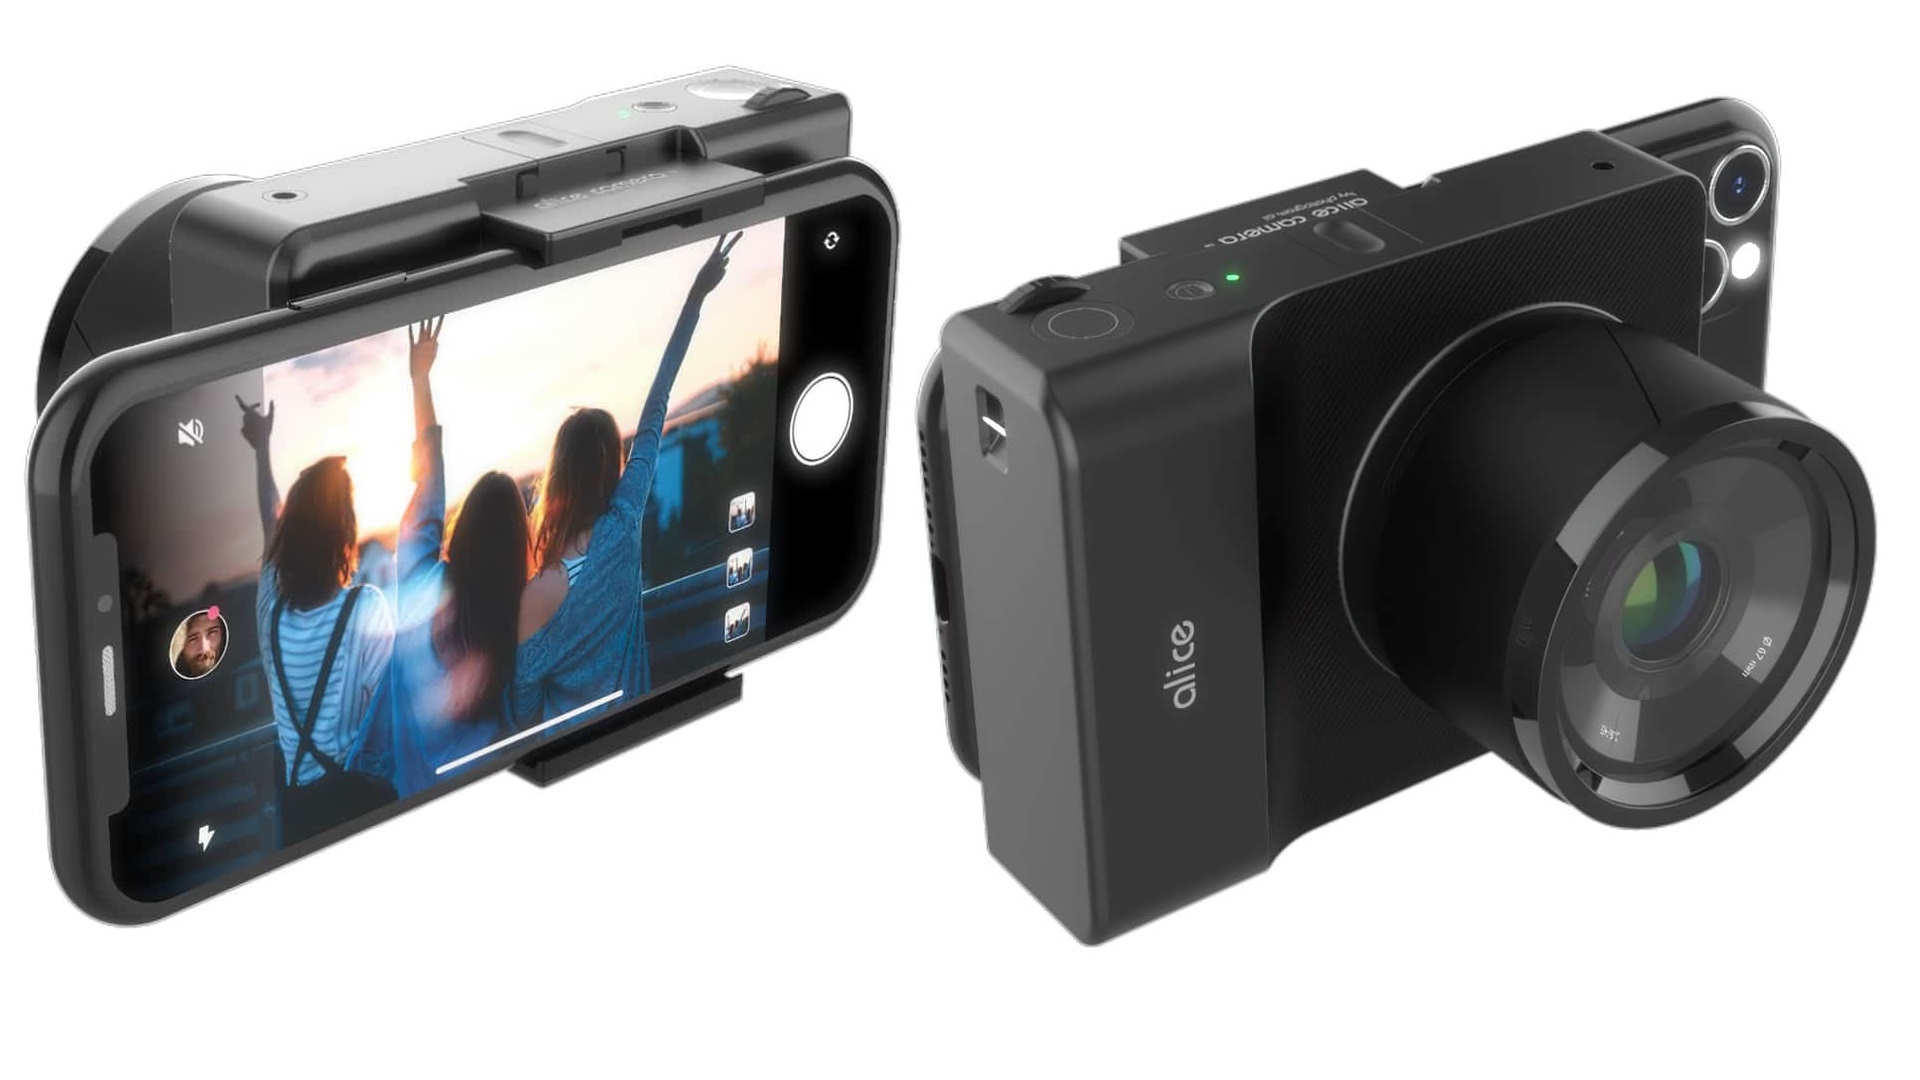 Sketchy rumours point to Micro 4/3 smartphone camera sensors — smartphone  design or image quality may suffer as a result -  News